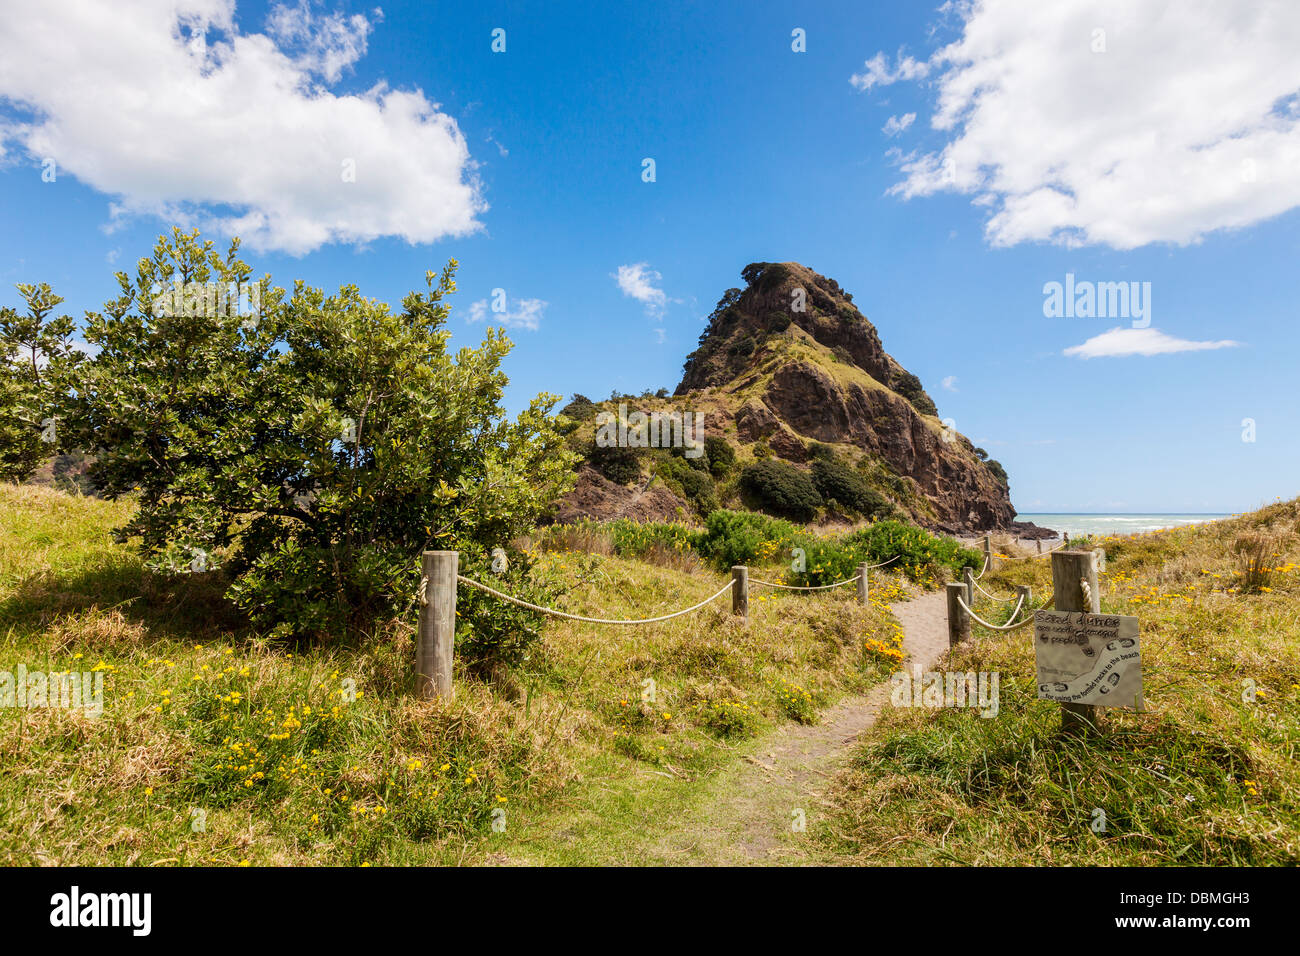 Lion Rock, Piha, Auckland Region, New Zealand, with path through sand dunes and wild flowers. Stock Photo